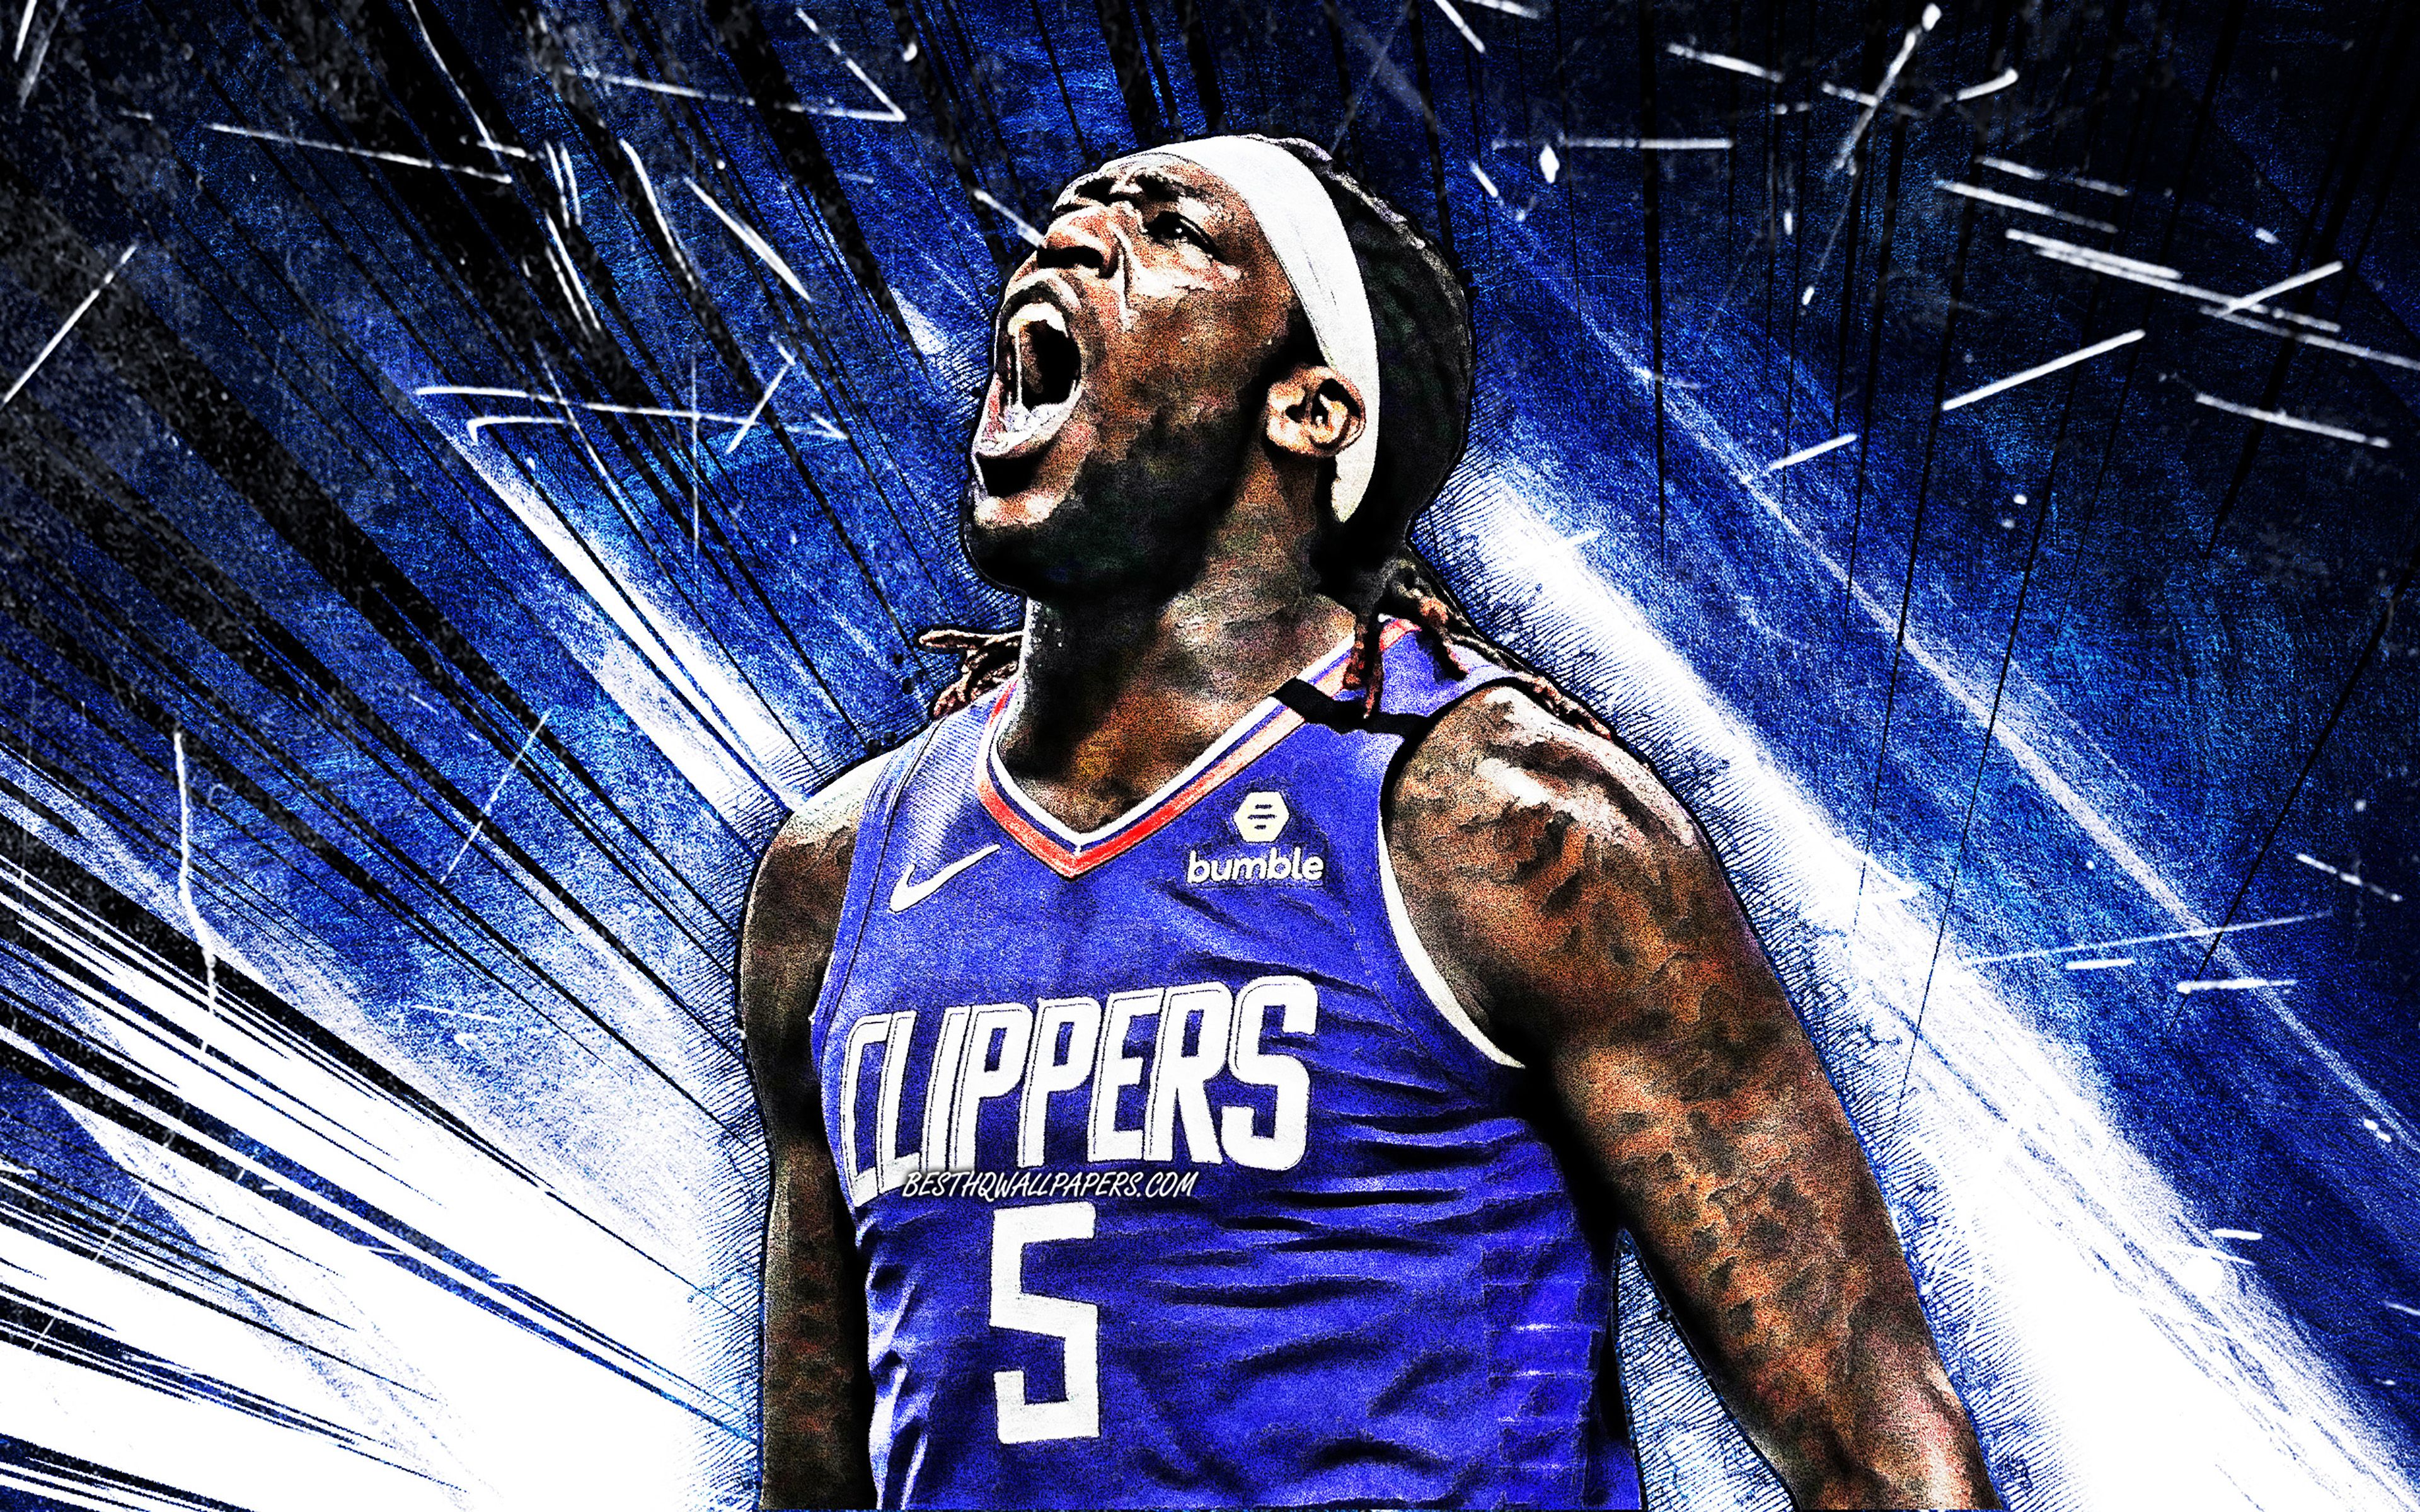 Download wallpaper 4k, Montrezl Harrell, grunge art, Los Angeles Clippers, NBA, basketball, Montrezl Dashay Harrell, blue abstract rays, USA, Montrezl Harrell Los Angeles Clippers, creative, Montrezl Harrell 4K, LA Clippers for desktop